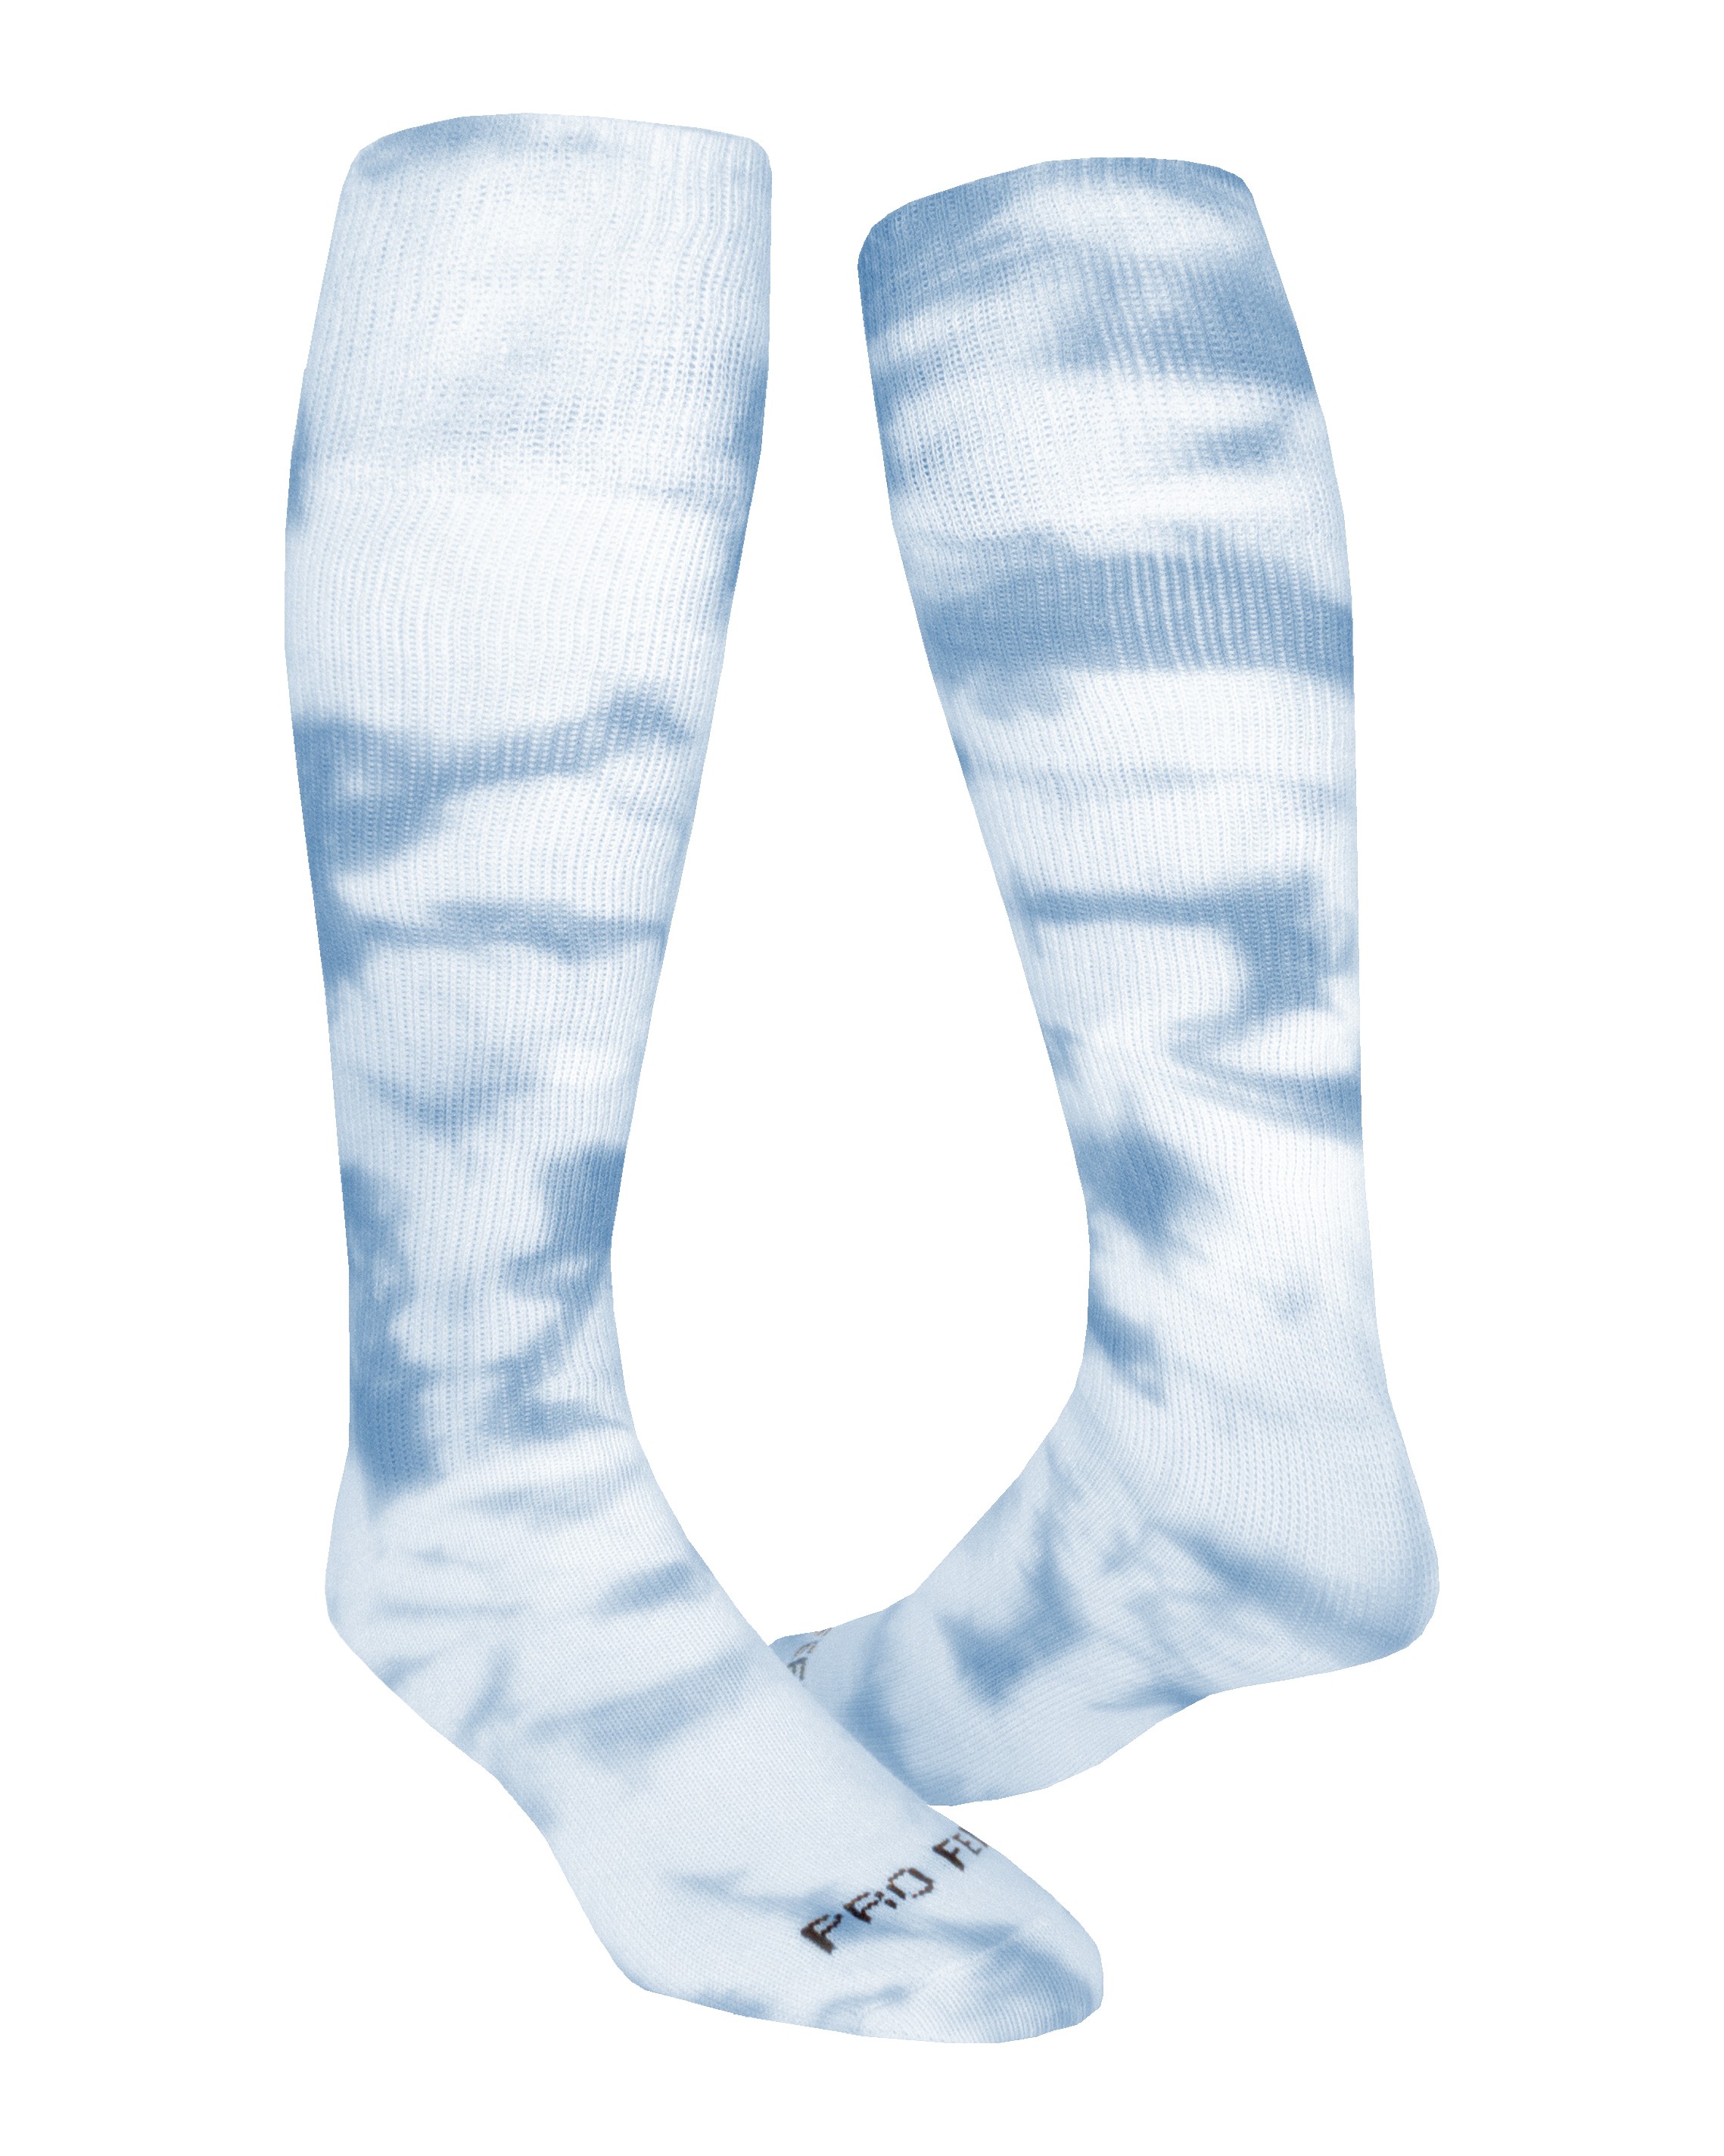 Team ICS Columbia Blue Tie Dye Socks - Please Allow 2-3 Weeks for Delivery